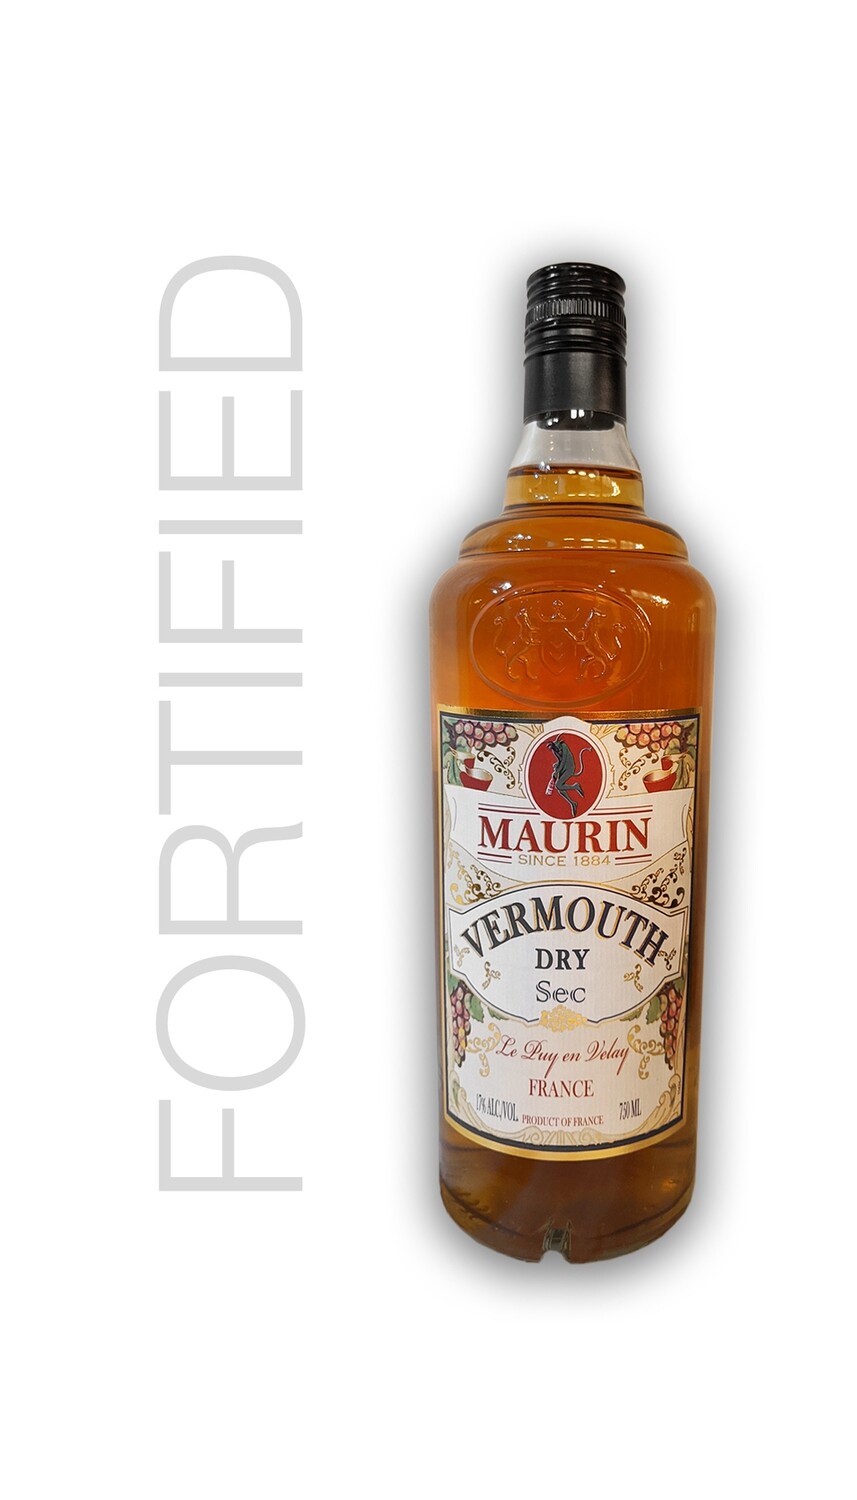 Maurin - Dry Vermouth